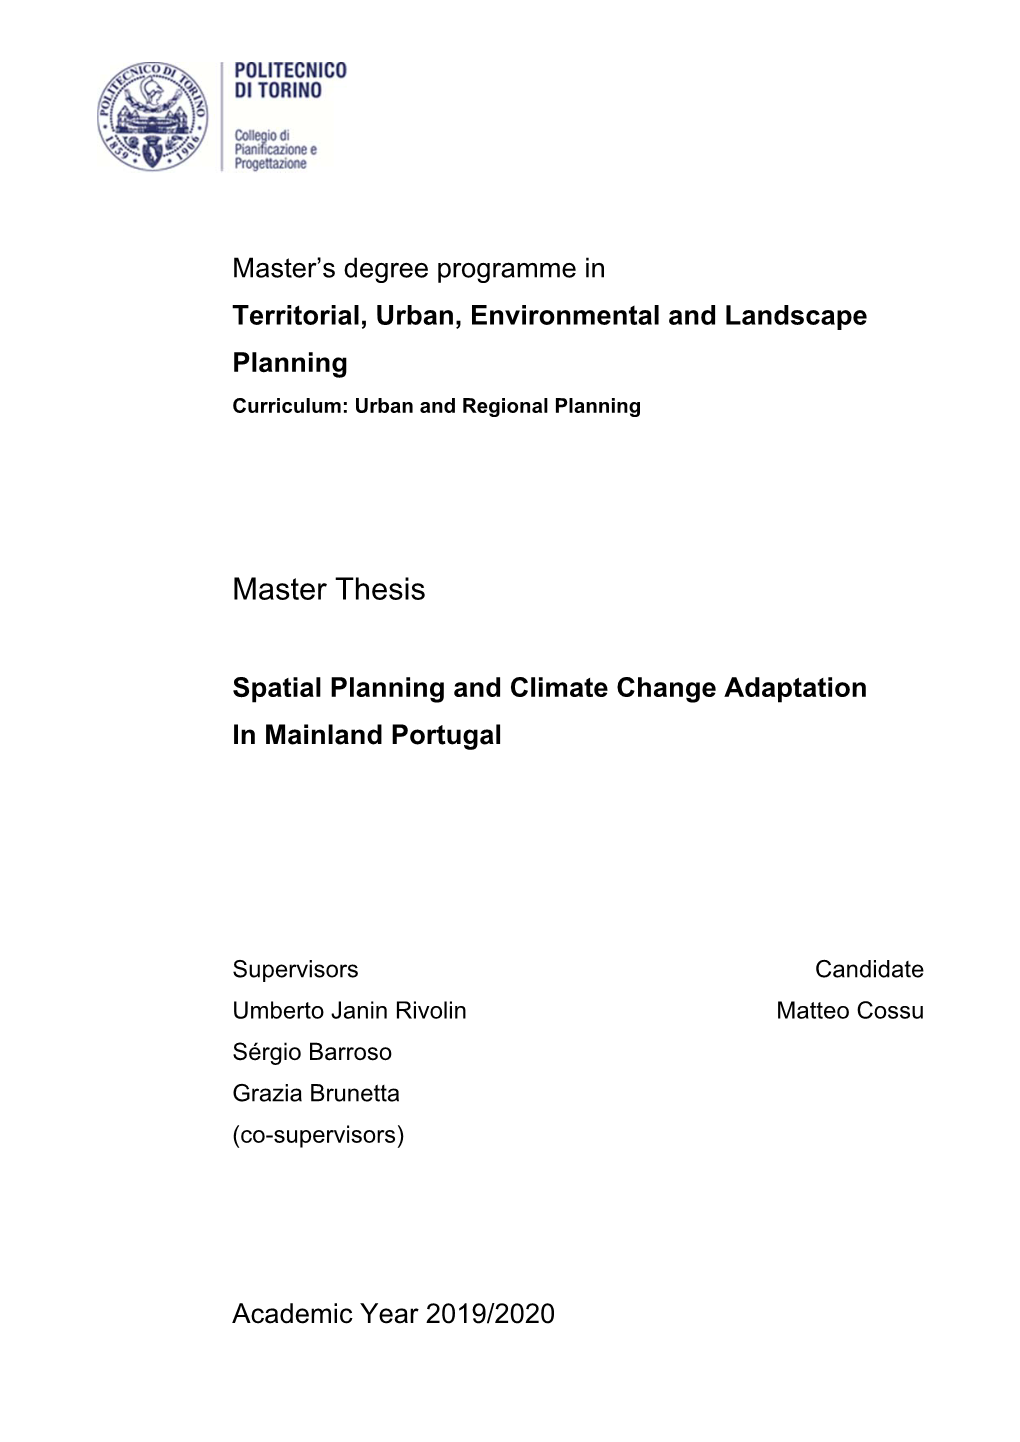 Spatial Planning and Climate Change Adaptation in Mainland Portugal